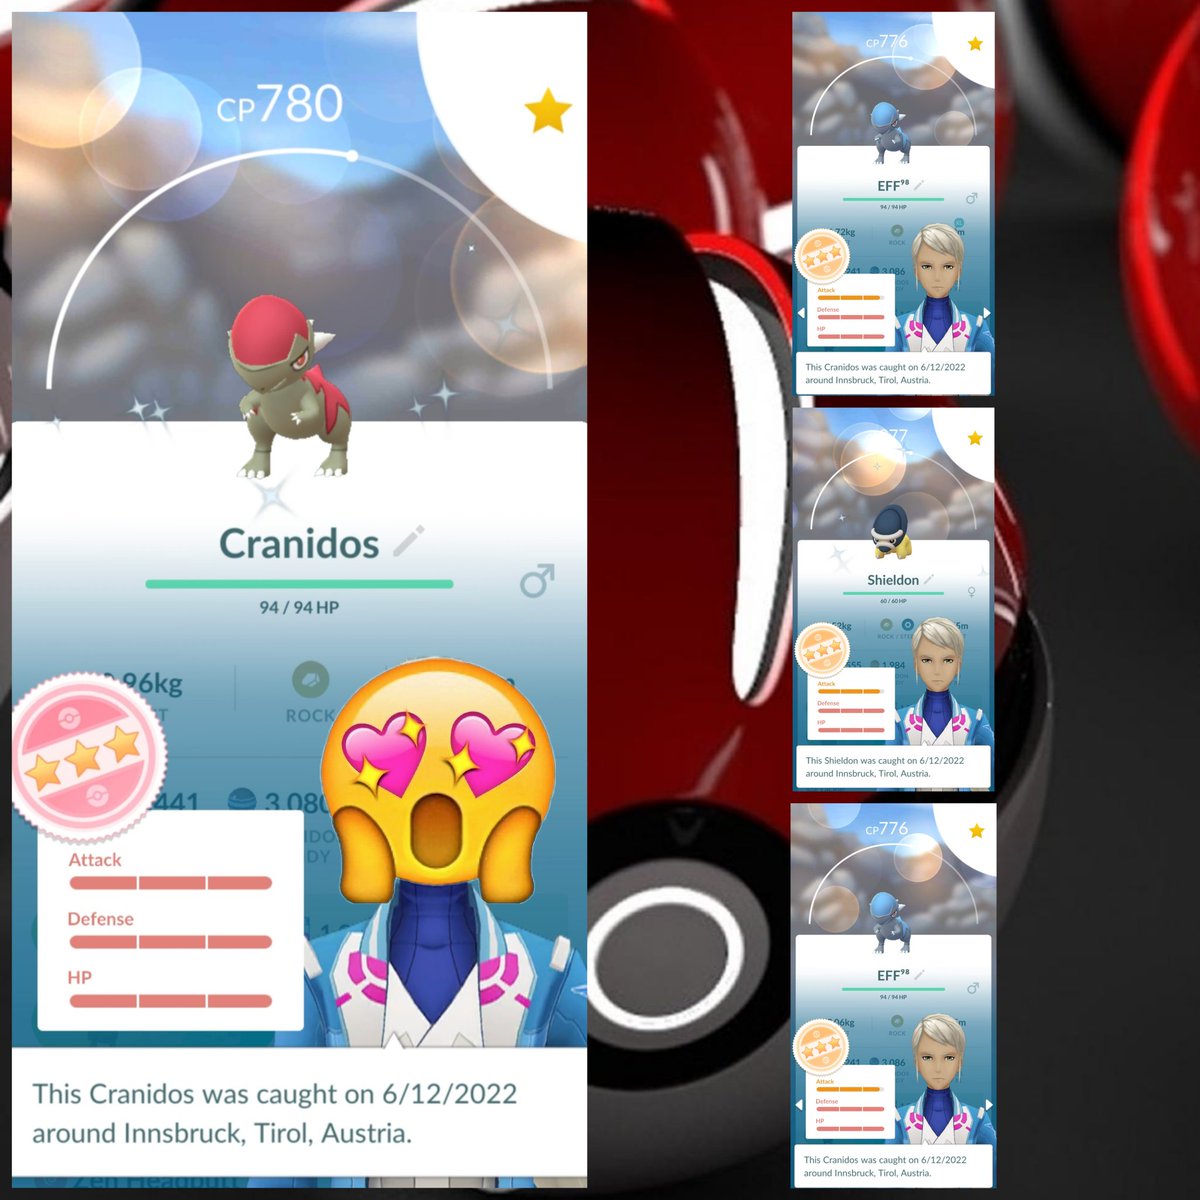 Was busy with another wonderful Sunday brunch together with my mom and therefore I only played ~90 Minutes of #ResearchDay...here's the result:

🌟Cranidos 4️⃣ (1x #SHUNDO💯 😱🤩😍🥳🥹)
🌟Shieldon 3️⃣ (1x 9️⃣8️⃣% #PseudoSHUNDO)

#PokemonGO #ShinyPokemon #SeasonOfGO #UltraUnlock